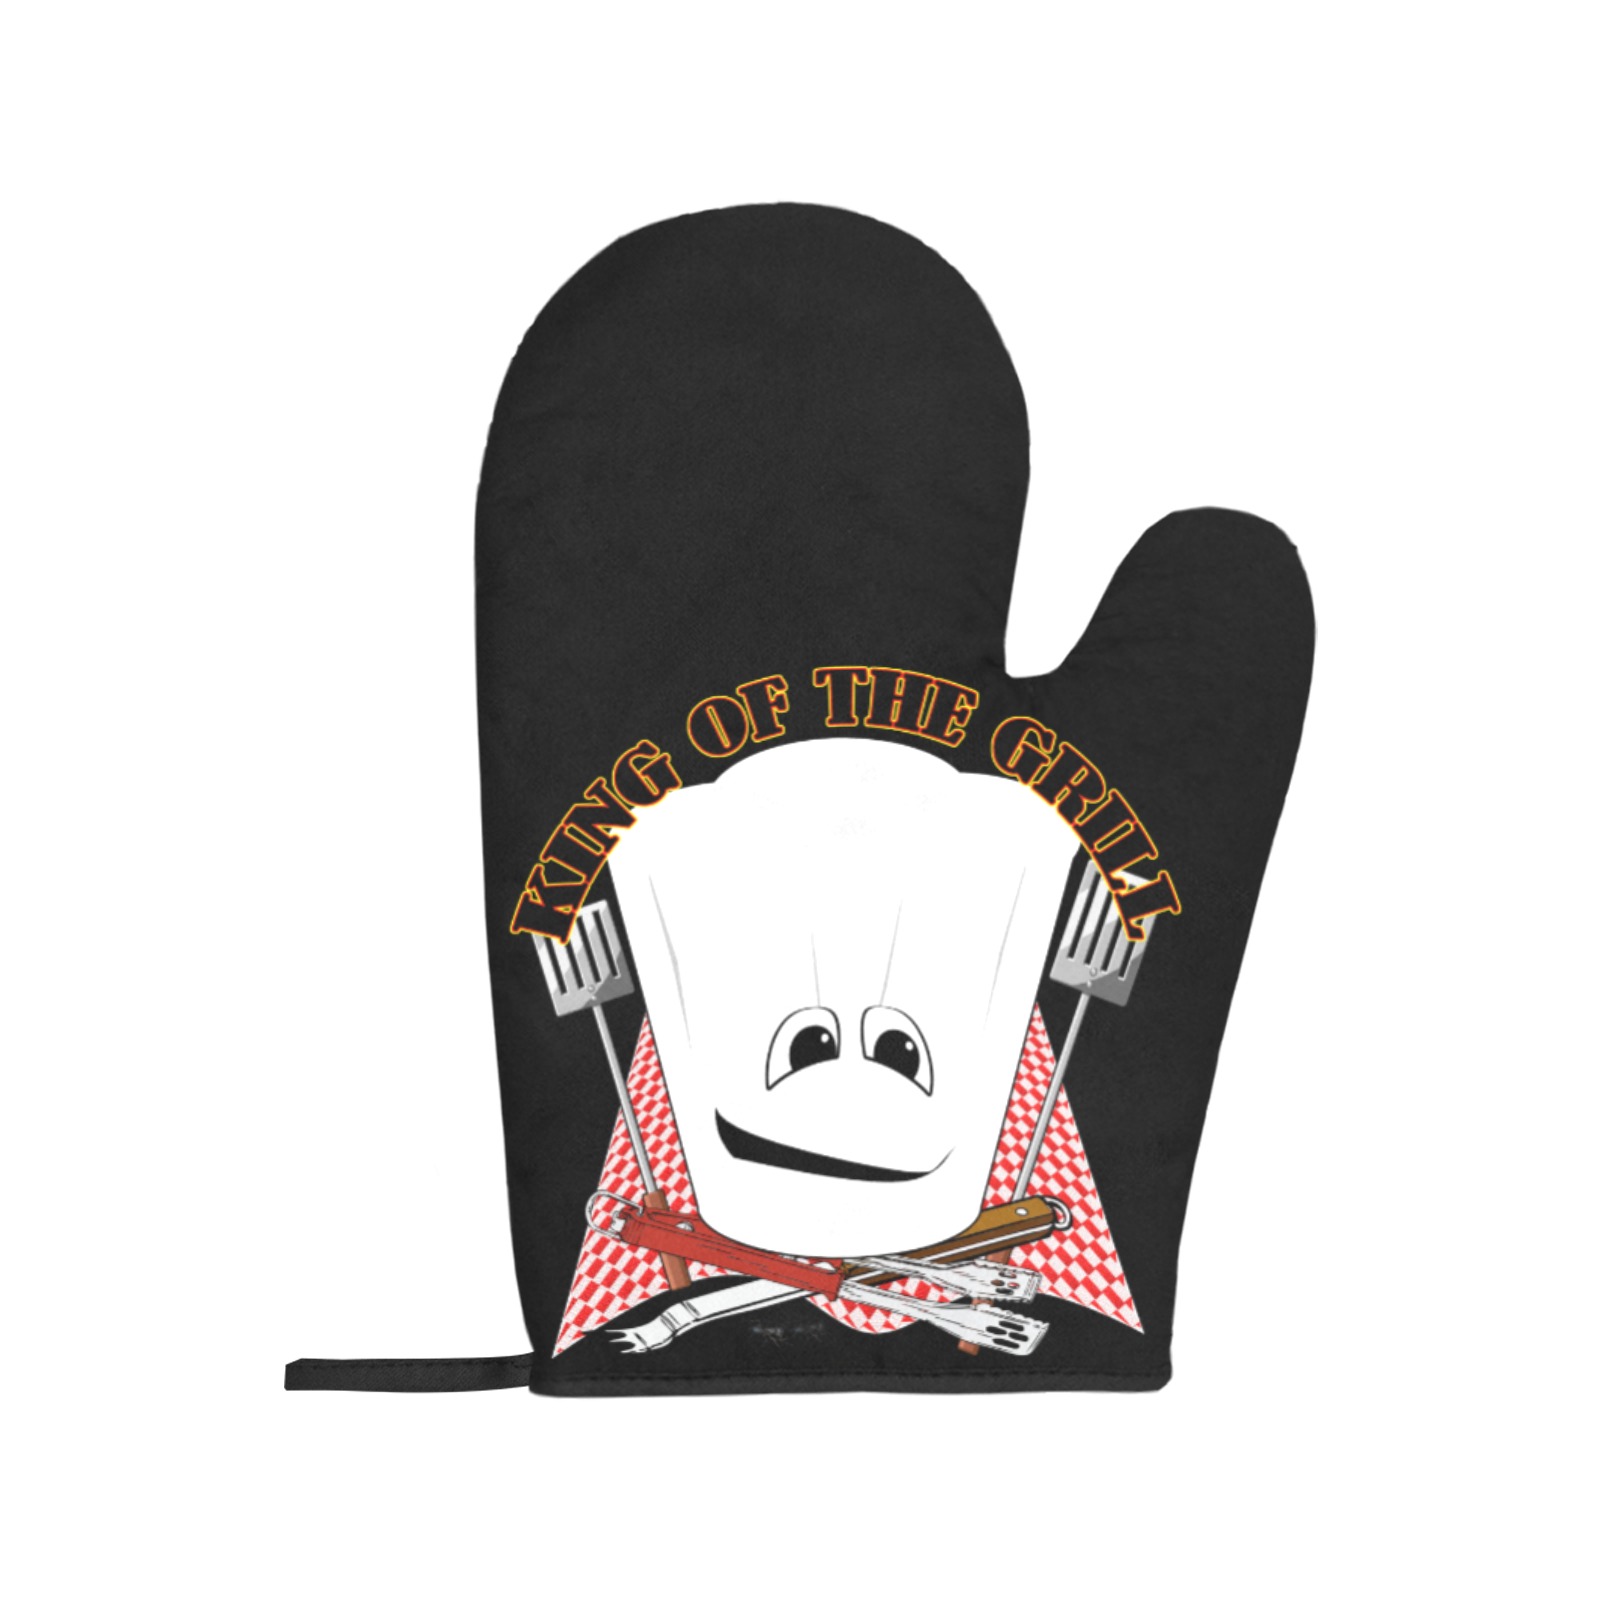 King of the Grill - Grill Master Black Oven Mitt & Pot Holder